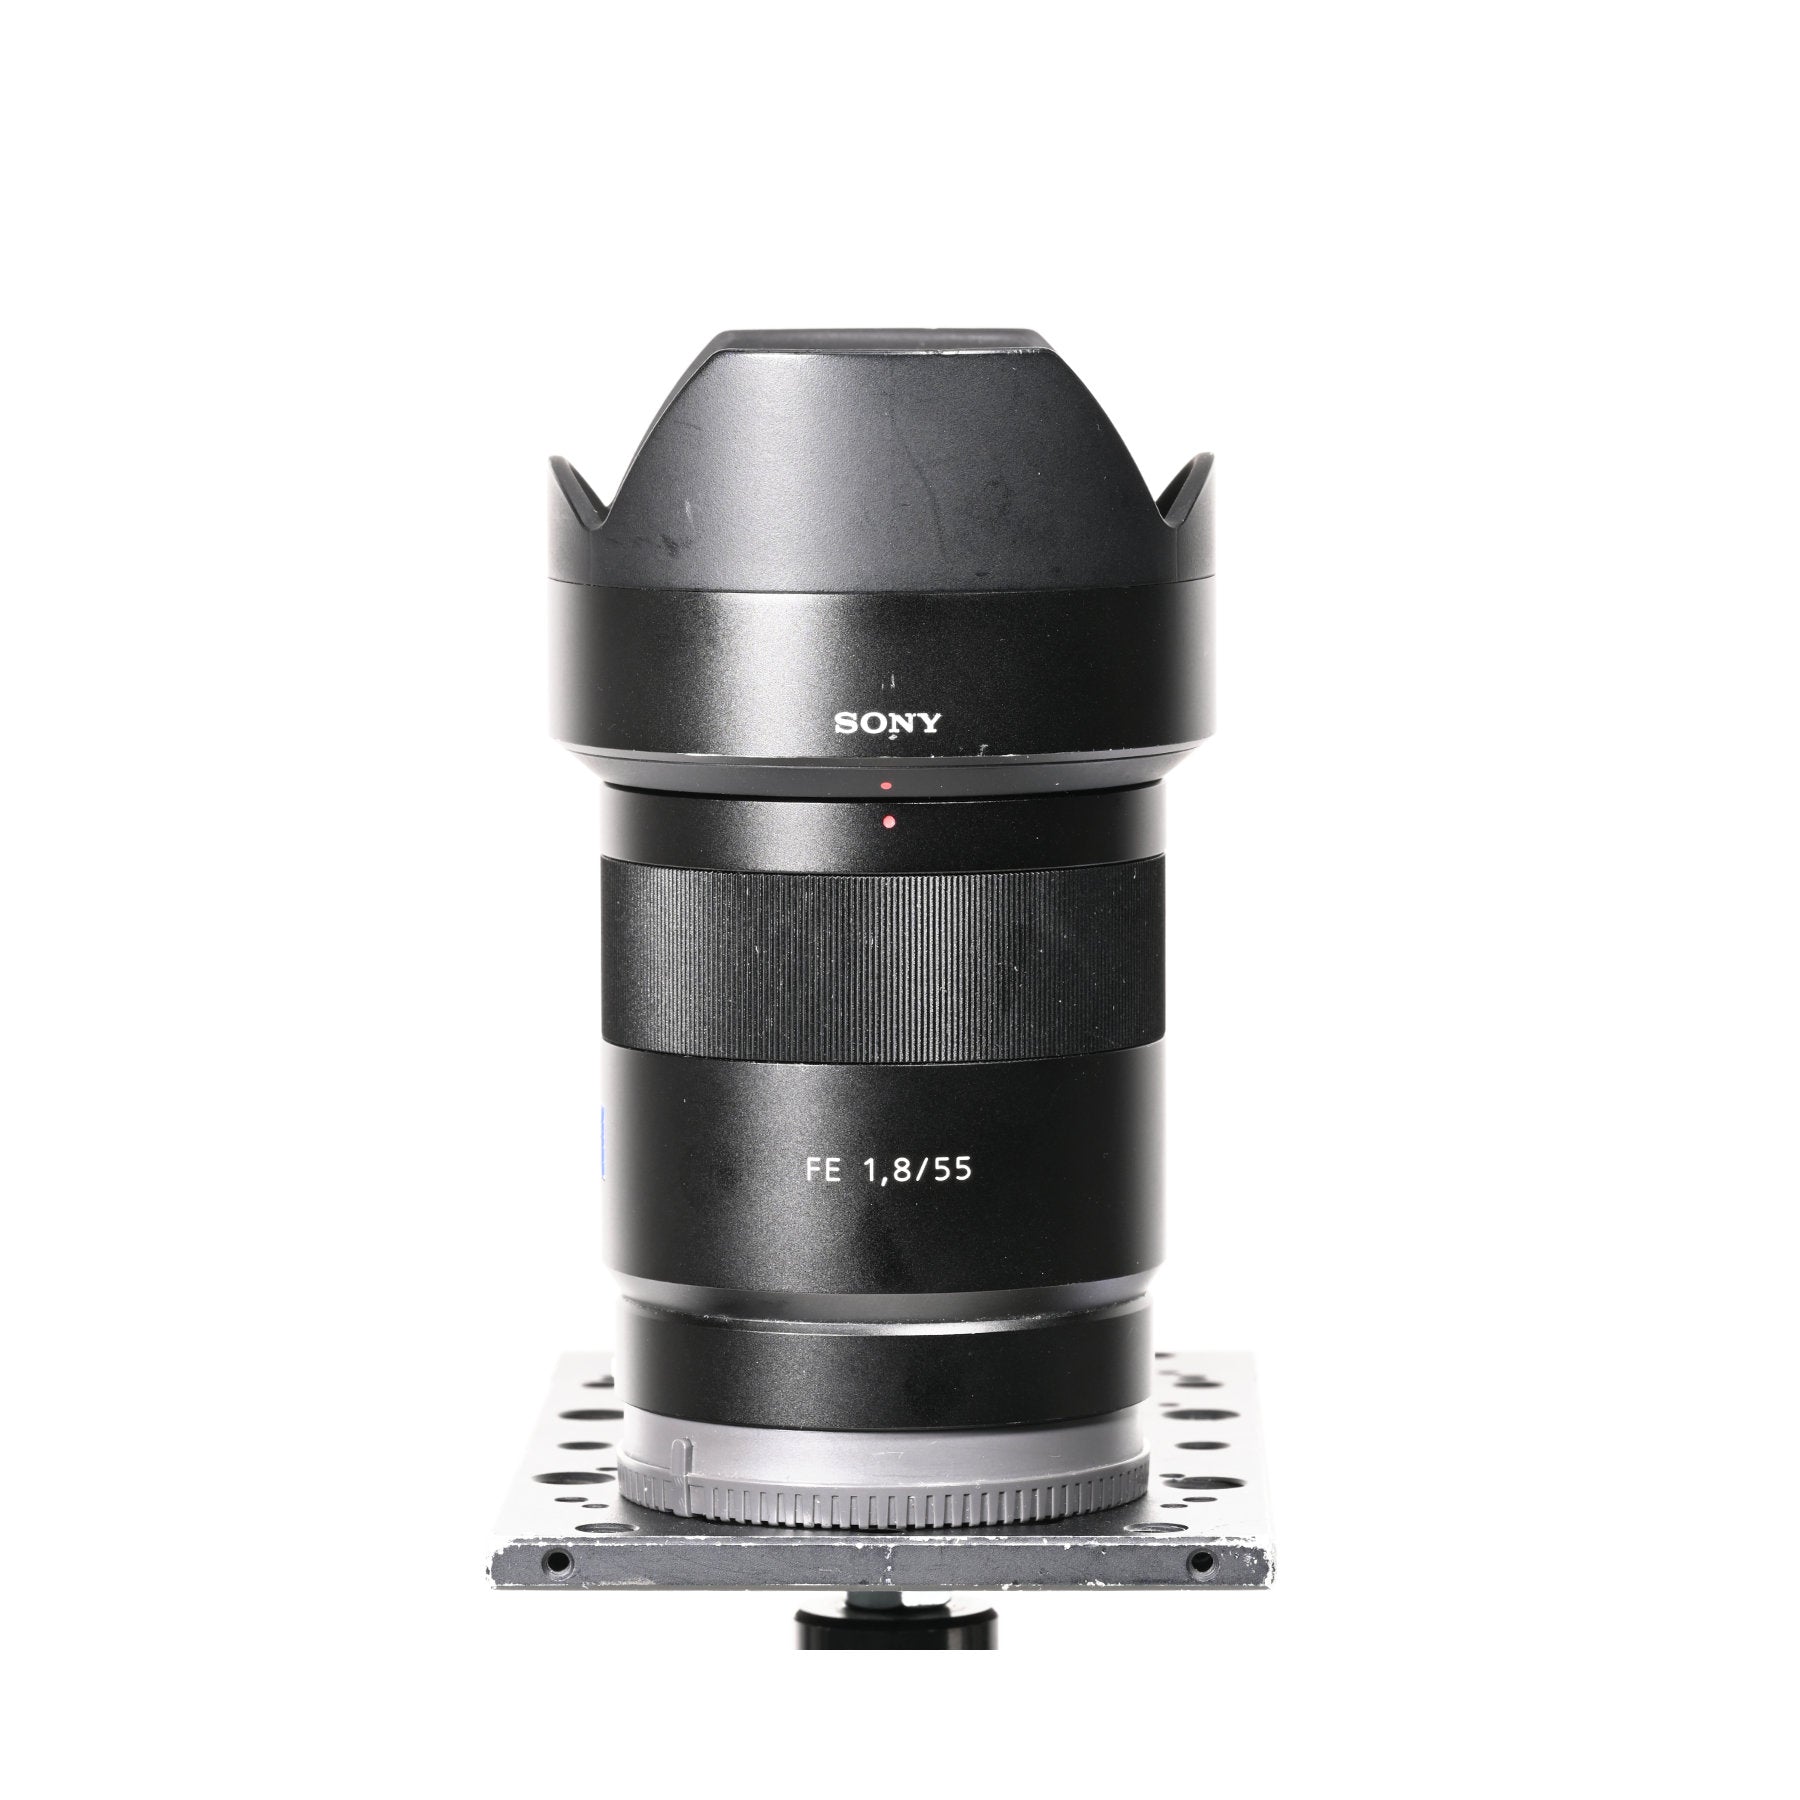 Buy Sony Zeiss 55mm Sonnar T* f1.8 Lens - Ex Rental second hand at Topic Store